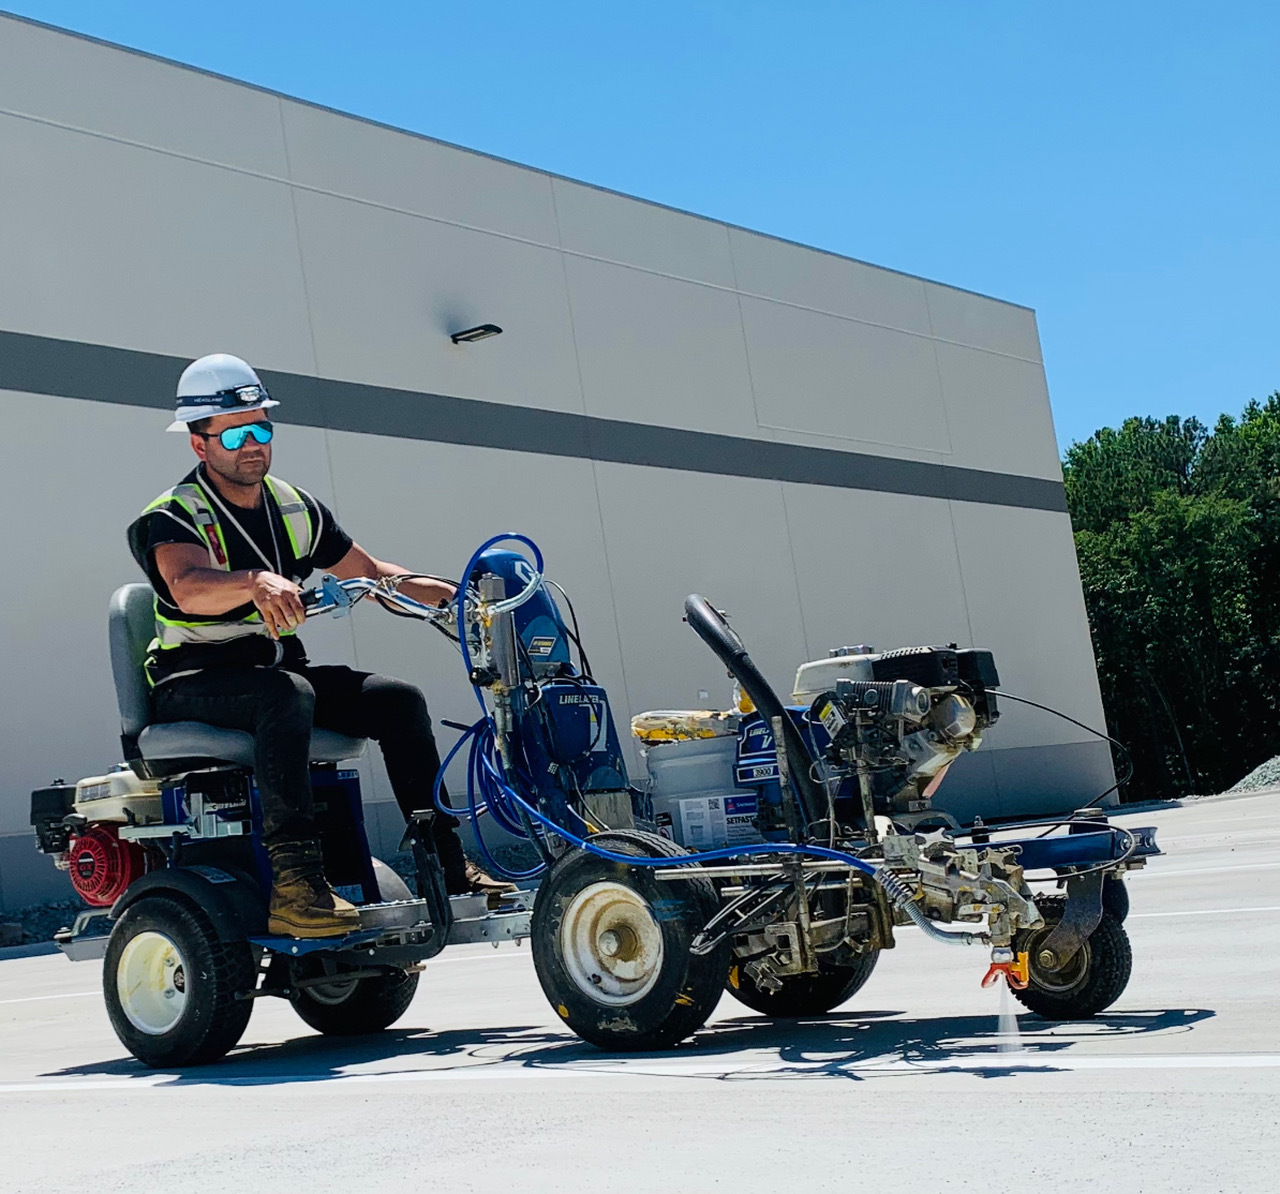 Atlanta Line Striping has been offering pavement and floor marking services for facility projects, commercial, institutions, and industrial spaces since 1994.